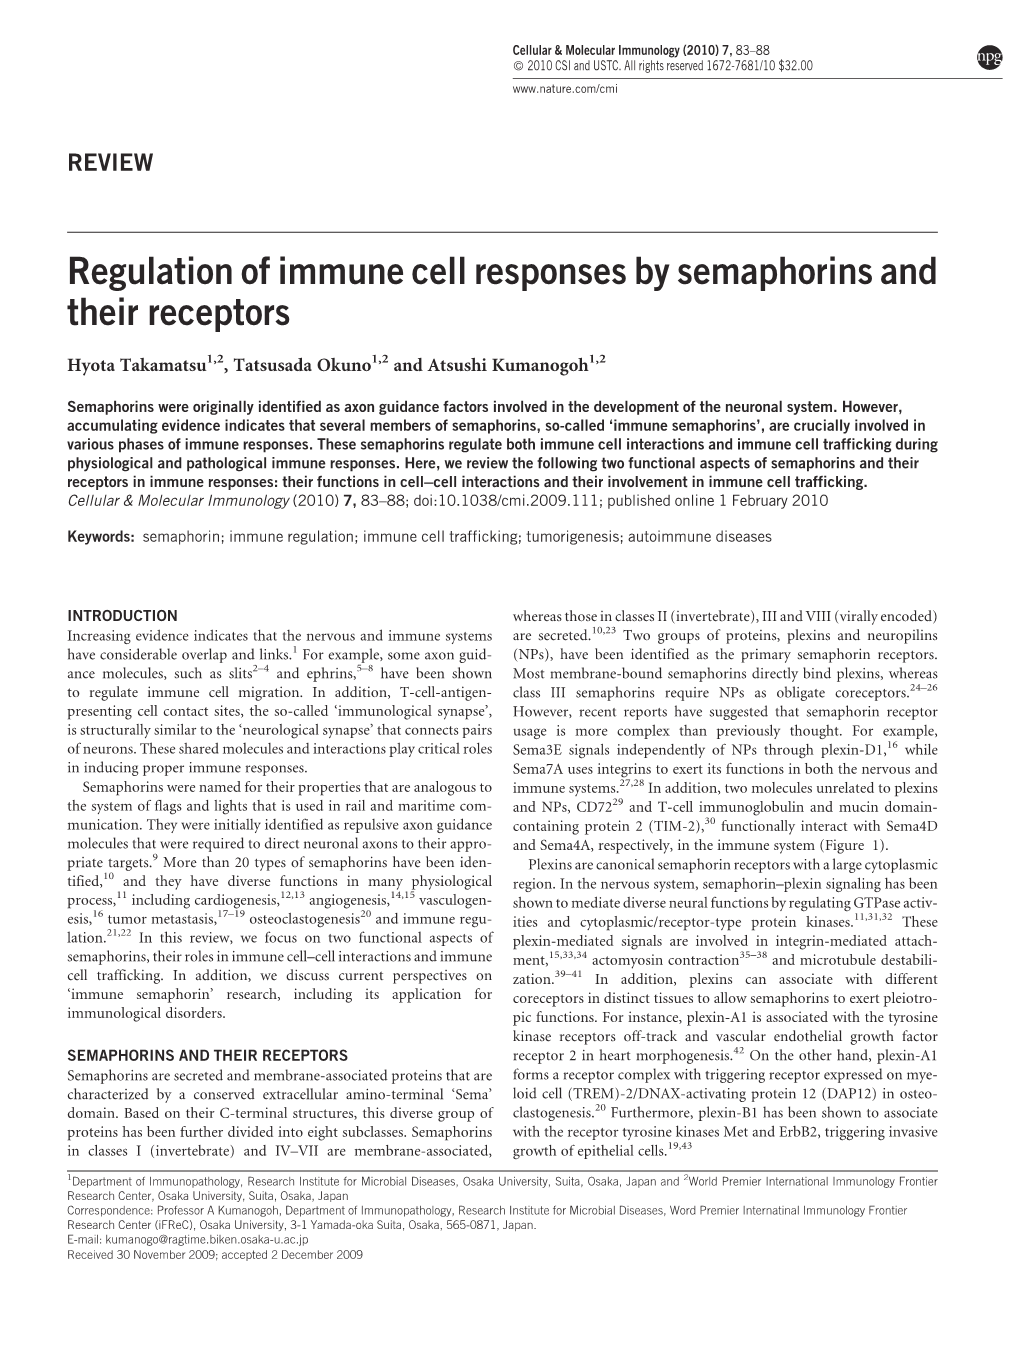 Regulation of Immune Cell Responses by Semaphorins and Their Receptors